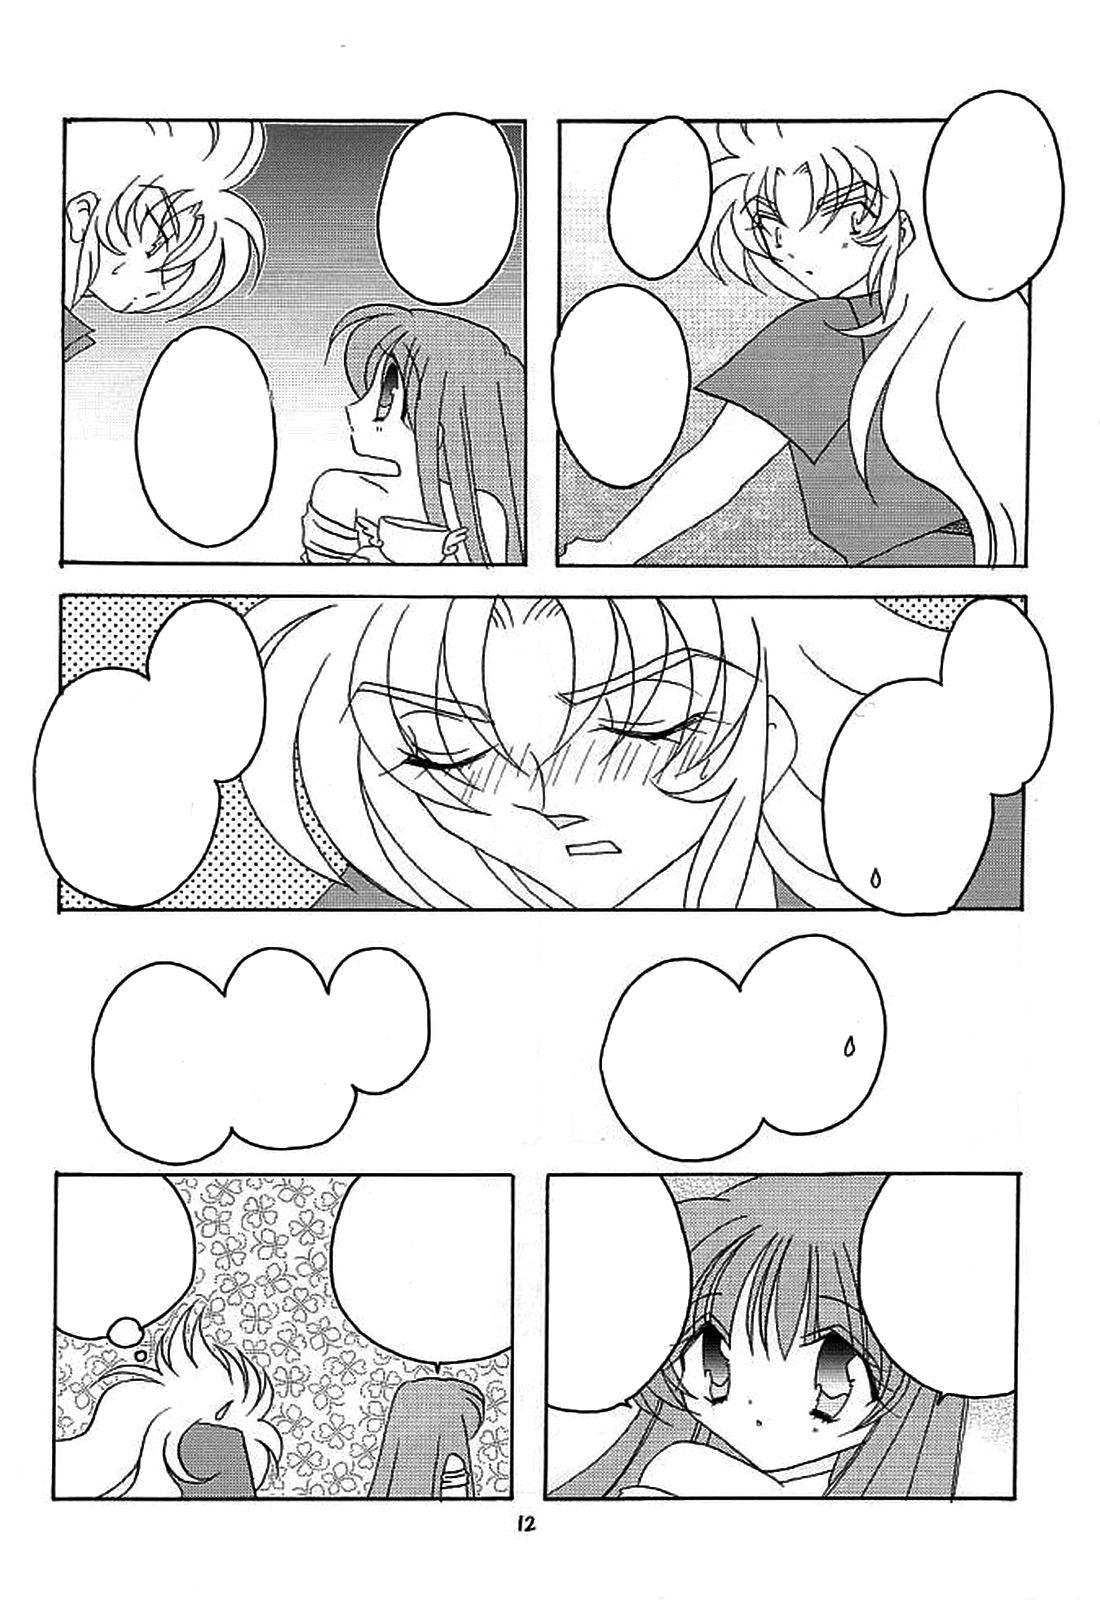 Francaise You are my Reason to Be 6 - Saint seiya Hardcore Fuck - Page 11